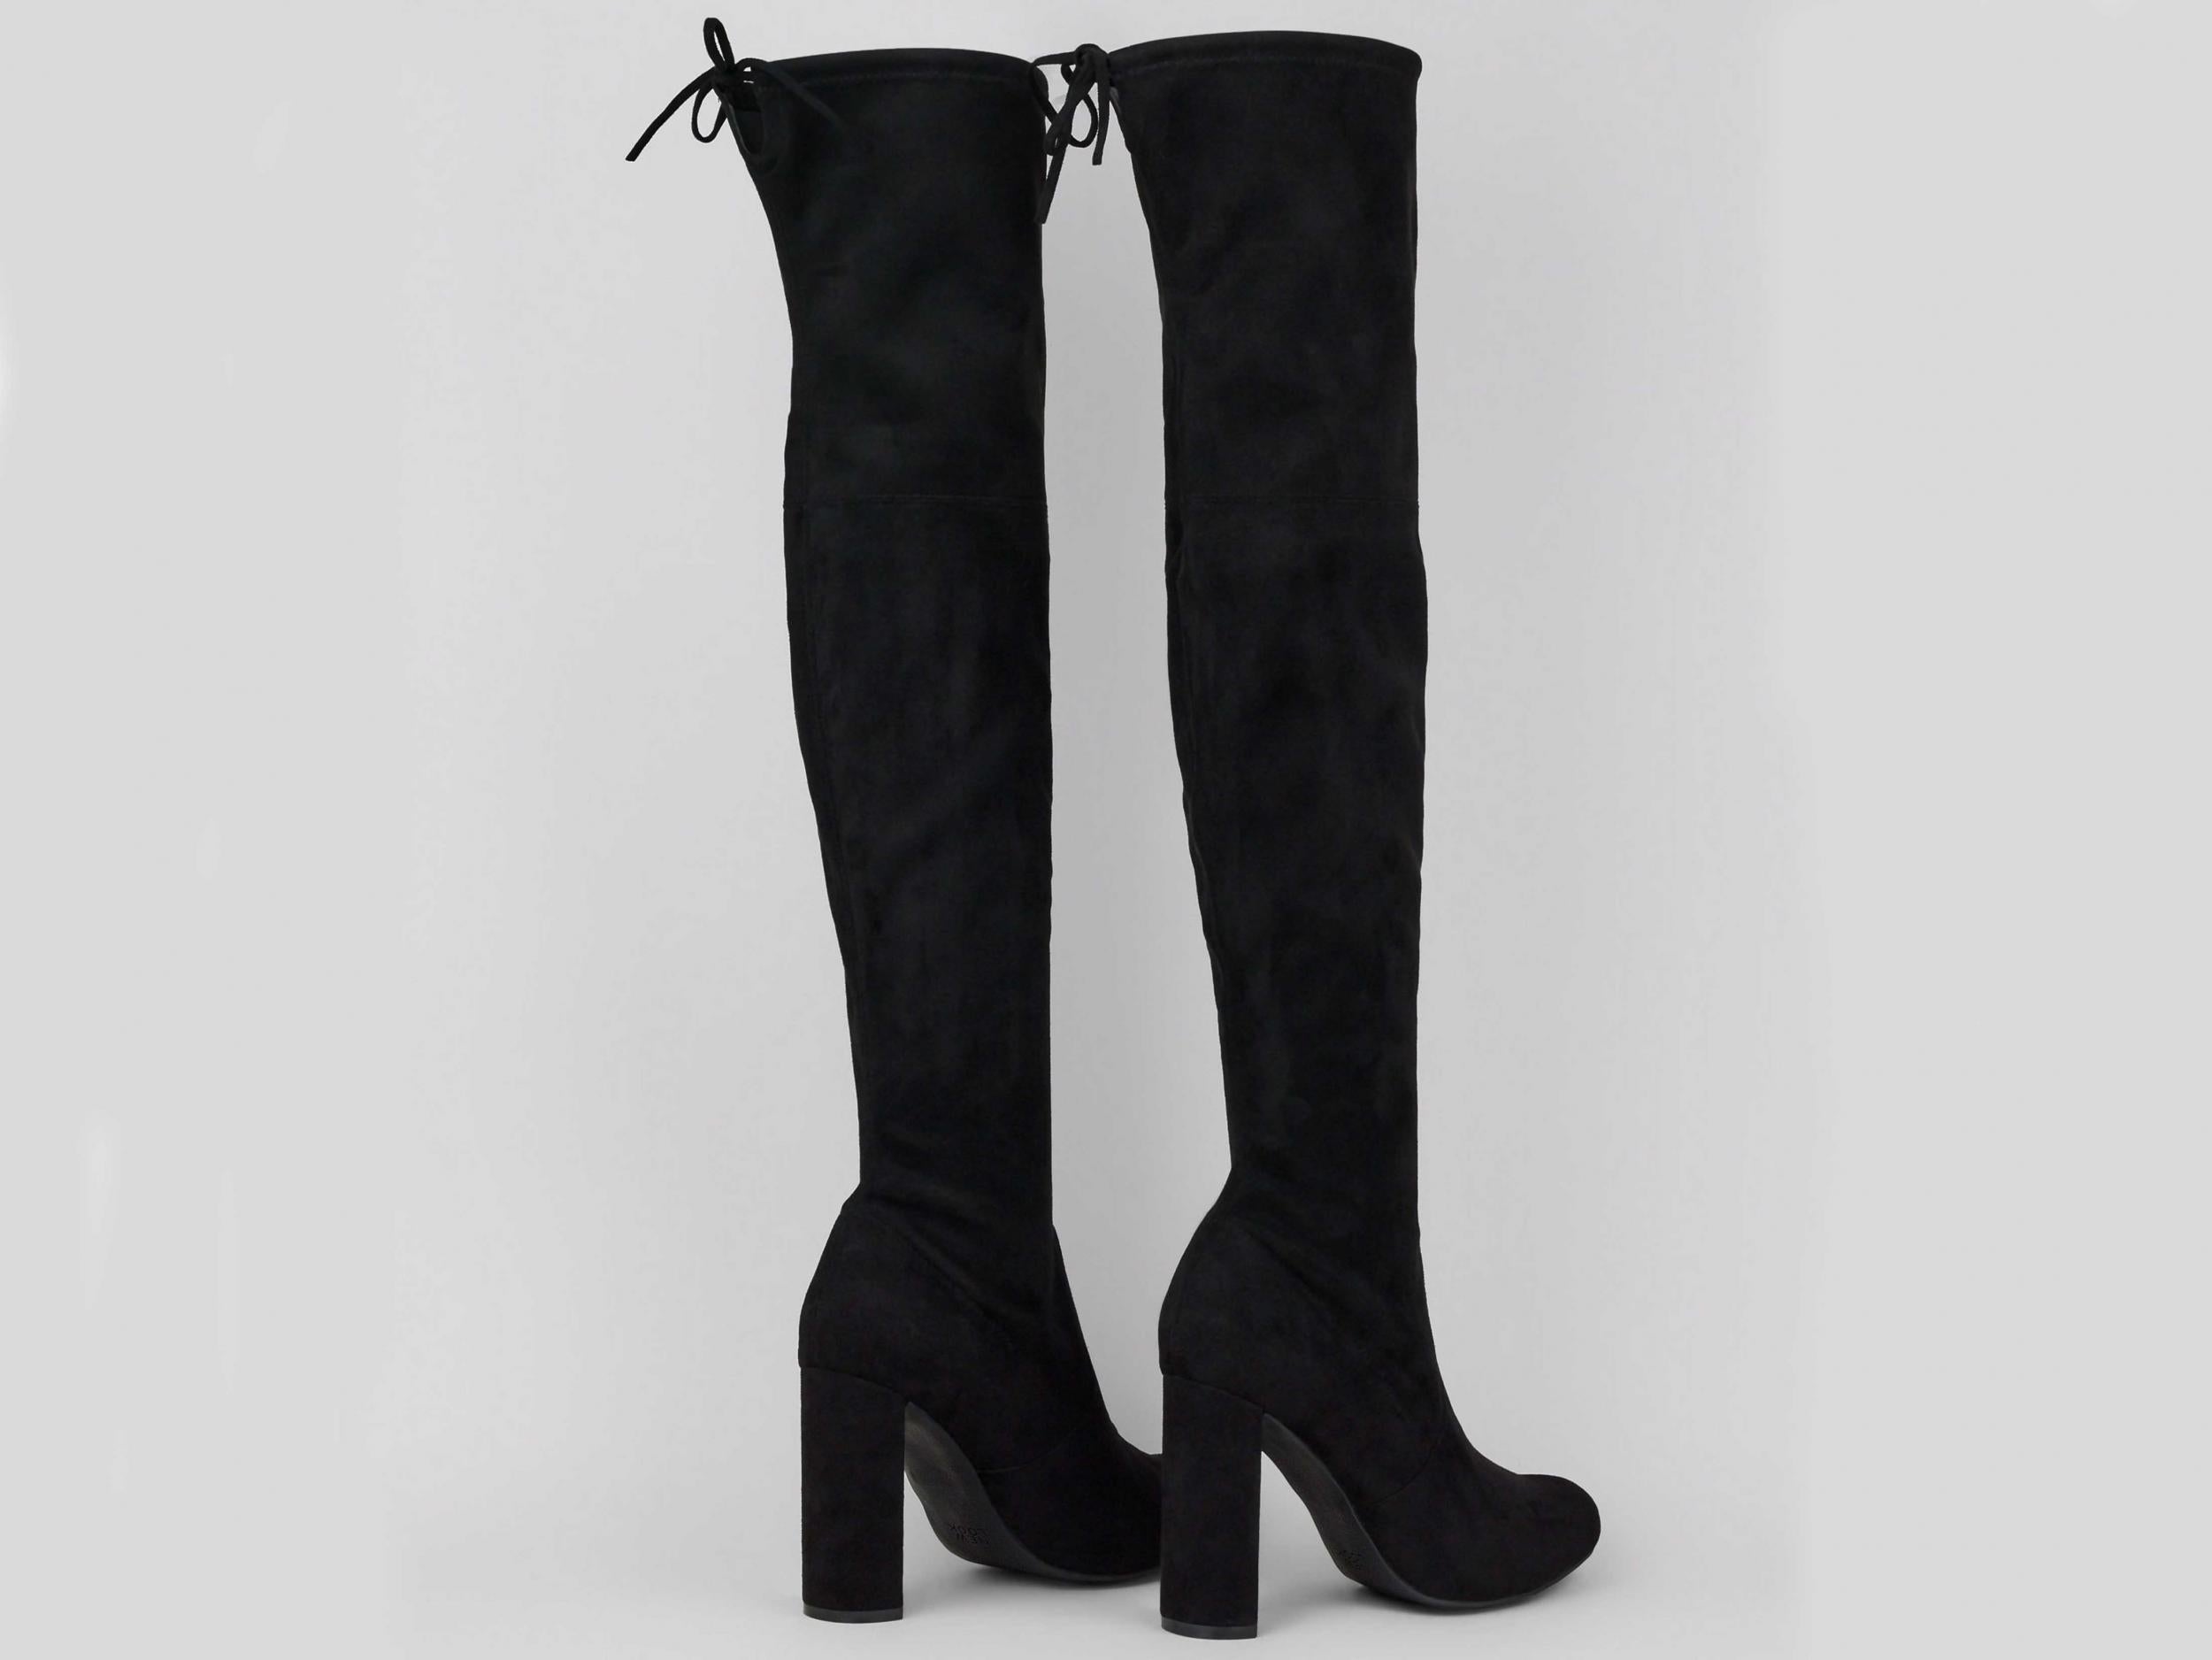 Black Suedette Over The Knee Boots, £22.49, New Look